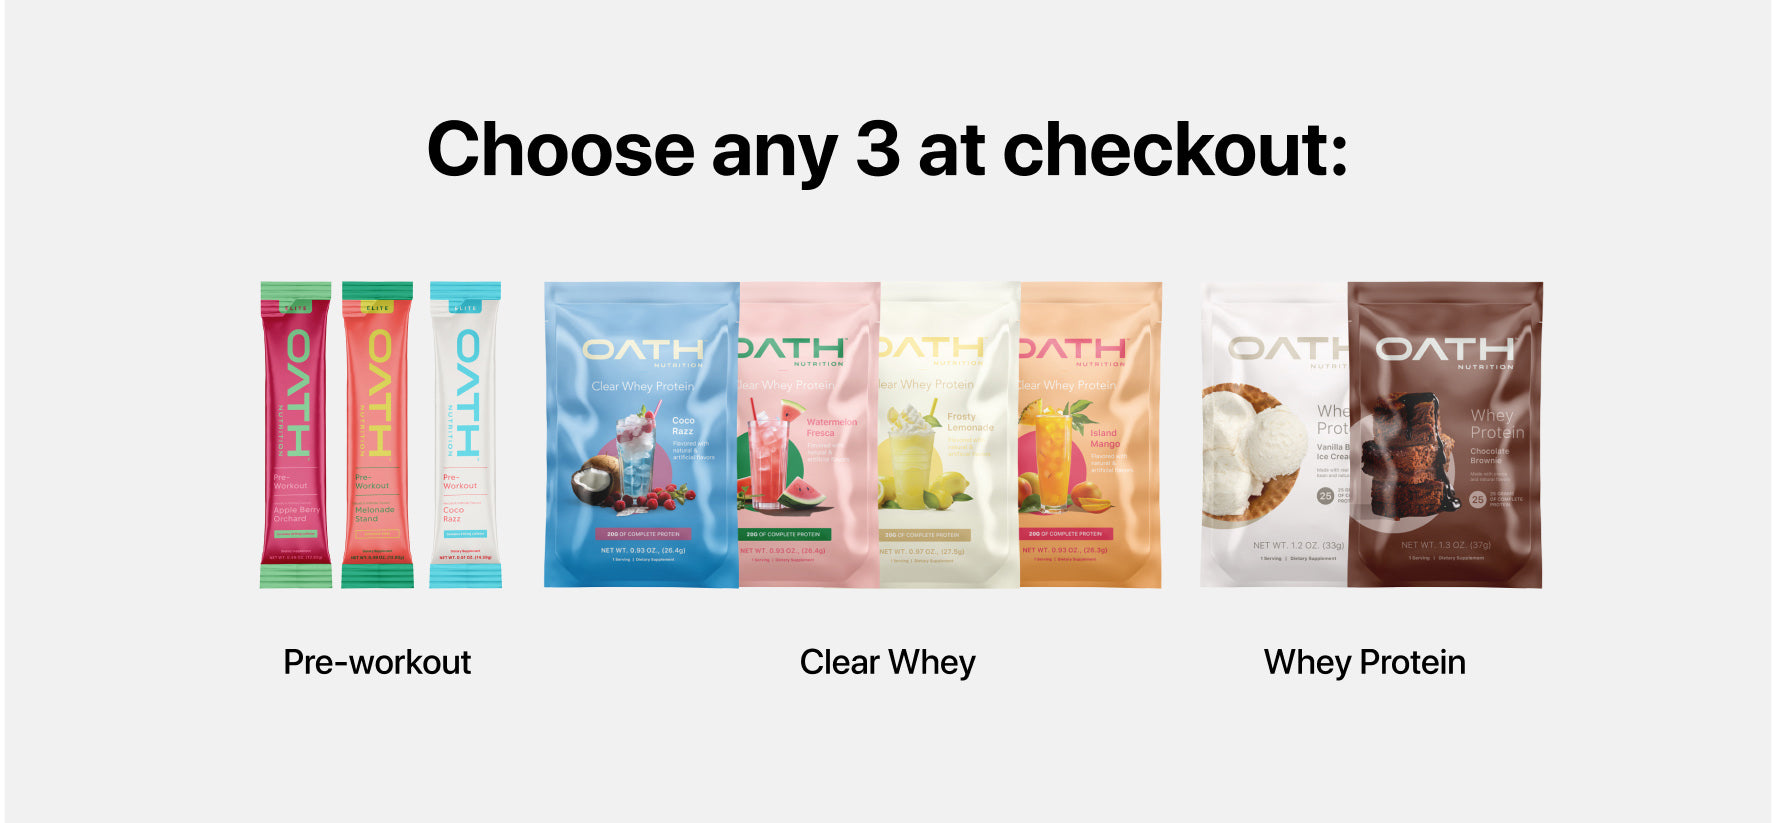 Choose any 3 - Pre-workout, Clear Whey, Whey Protein